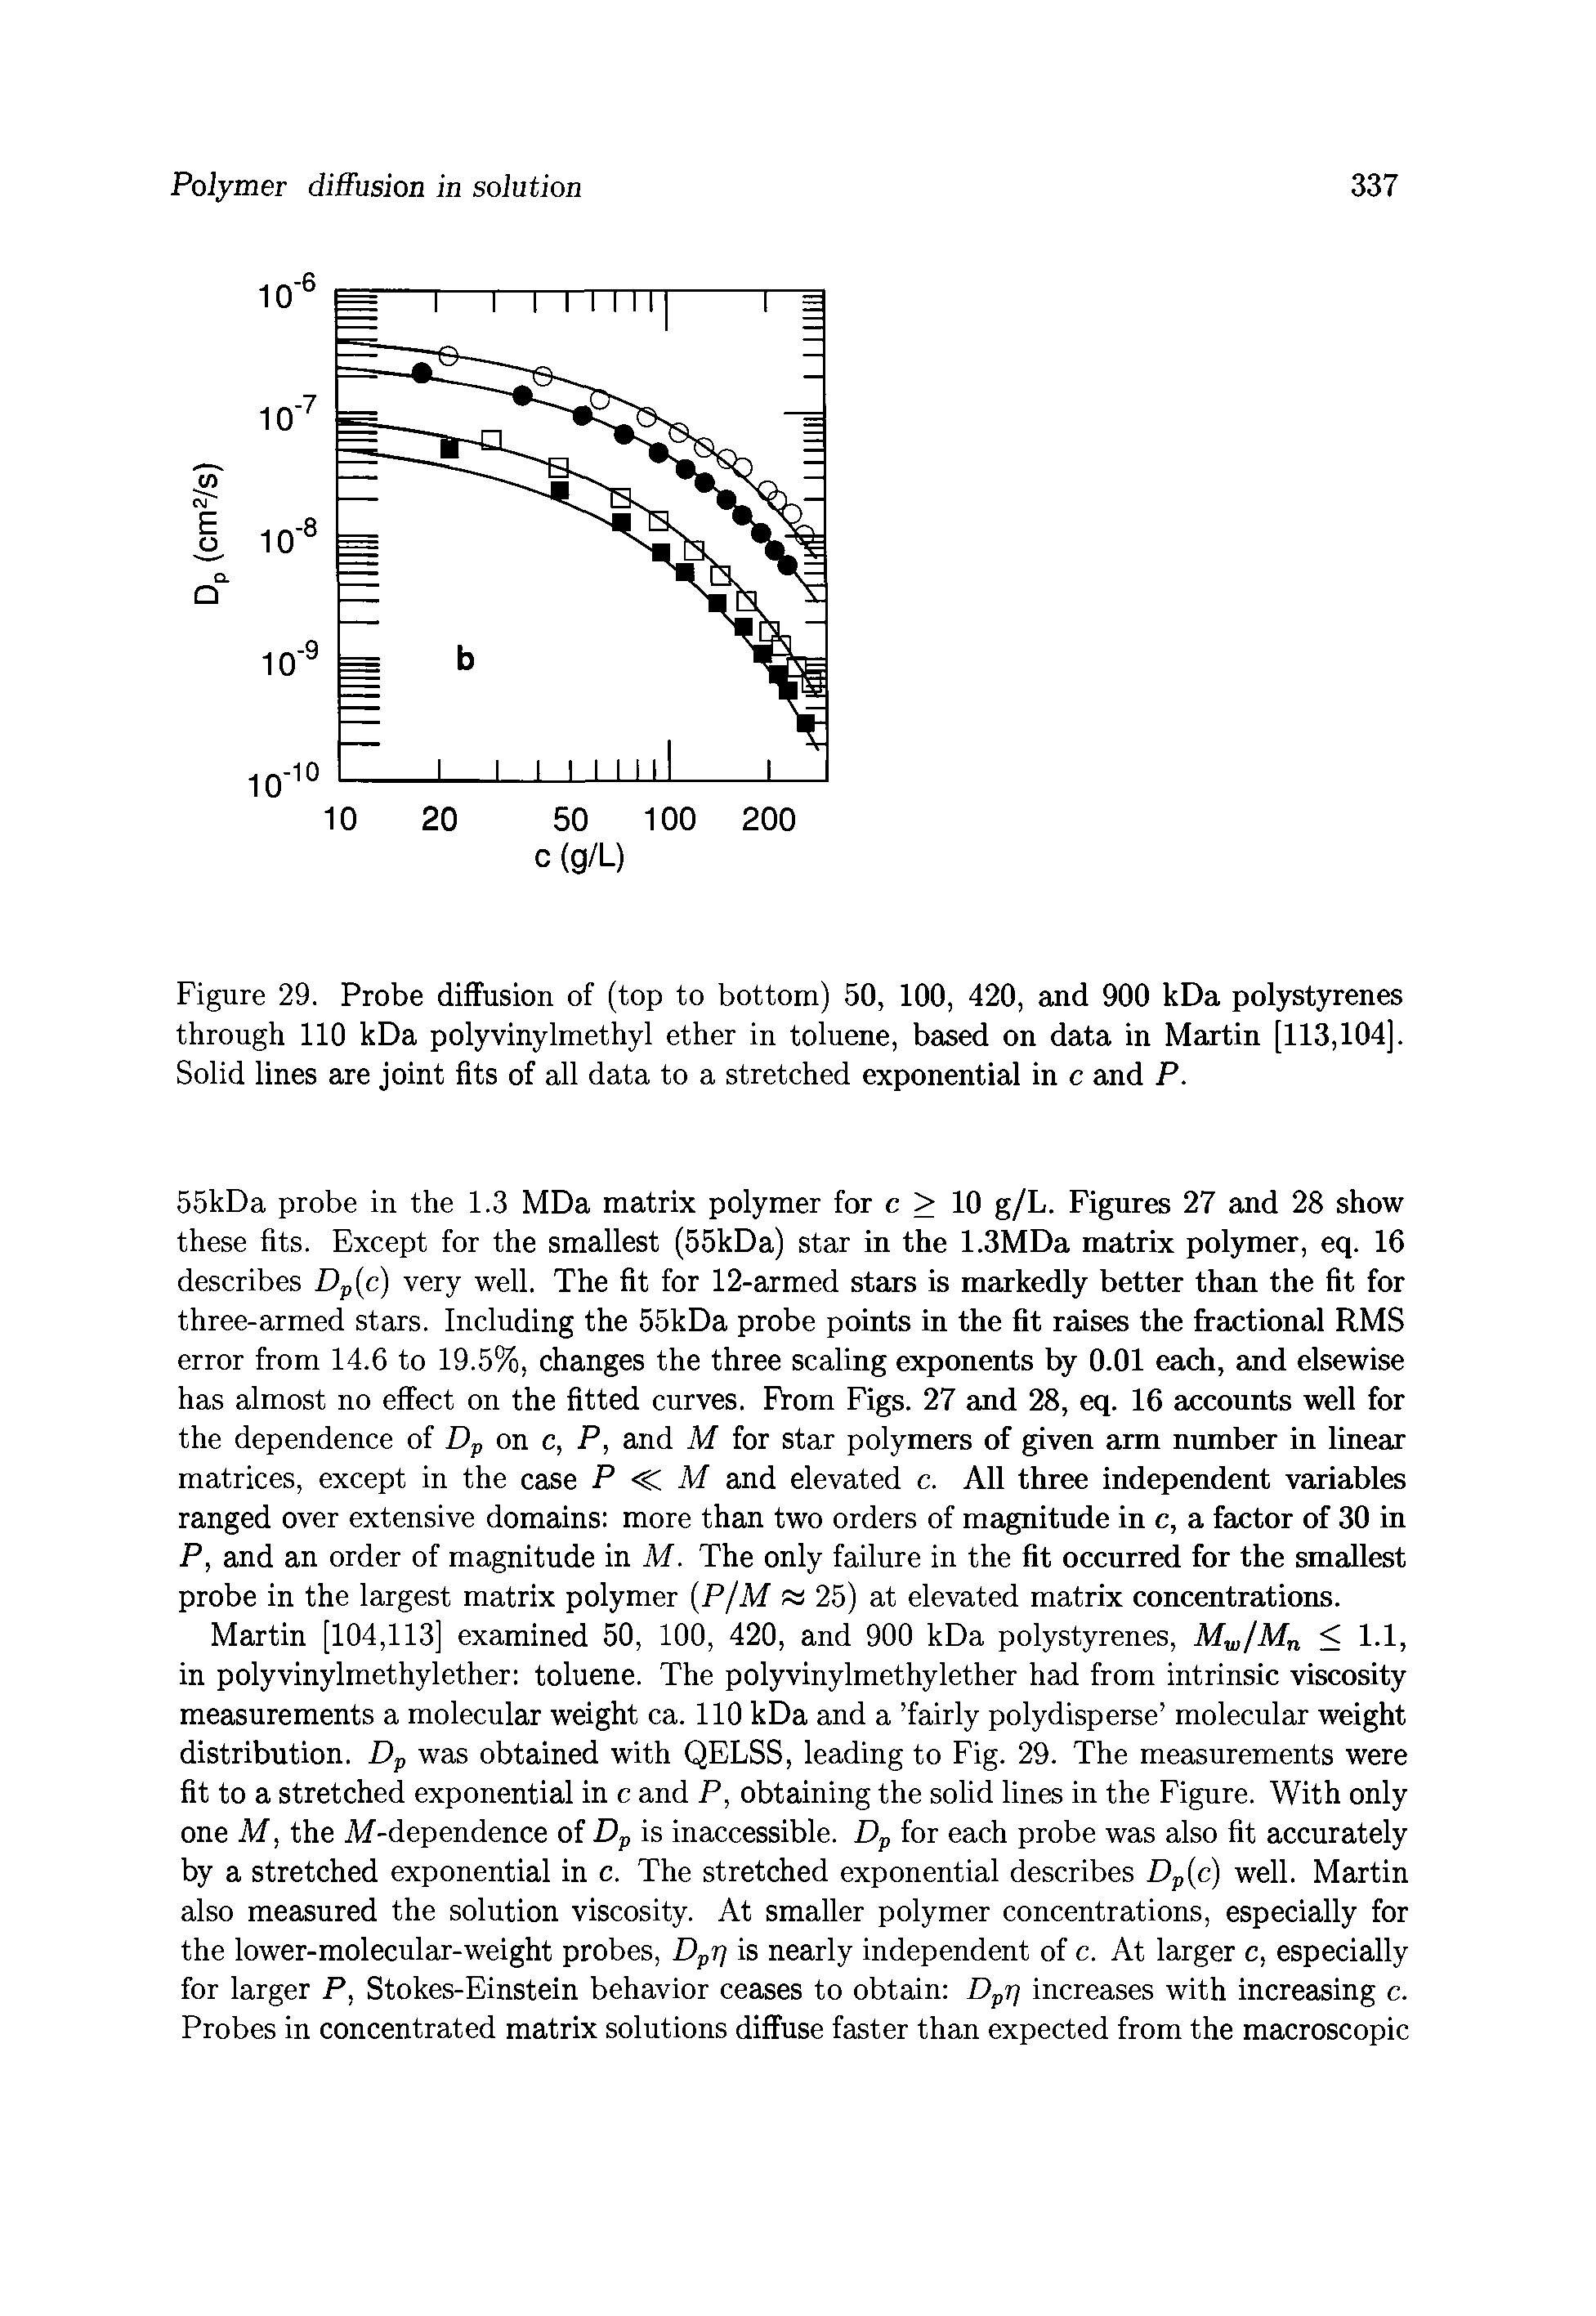 Figure 29. Probe diffusion of (top to bottom) 50, 100, 420, and 900 kDa polystyrenes through 110 kDa polyvinylmethyl ether in toluene, based on data in Martin [113,104], Solid lines are joint fits of all data to a stretched exponential in c and P.